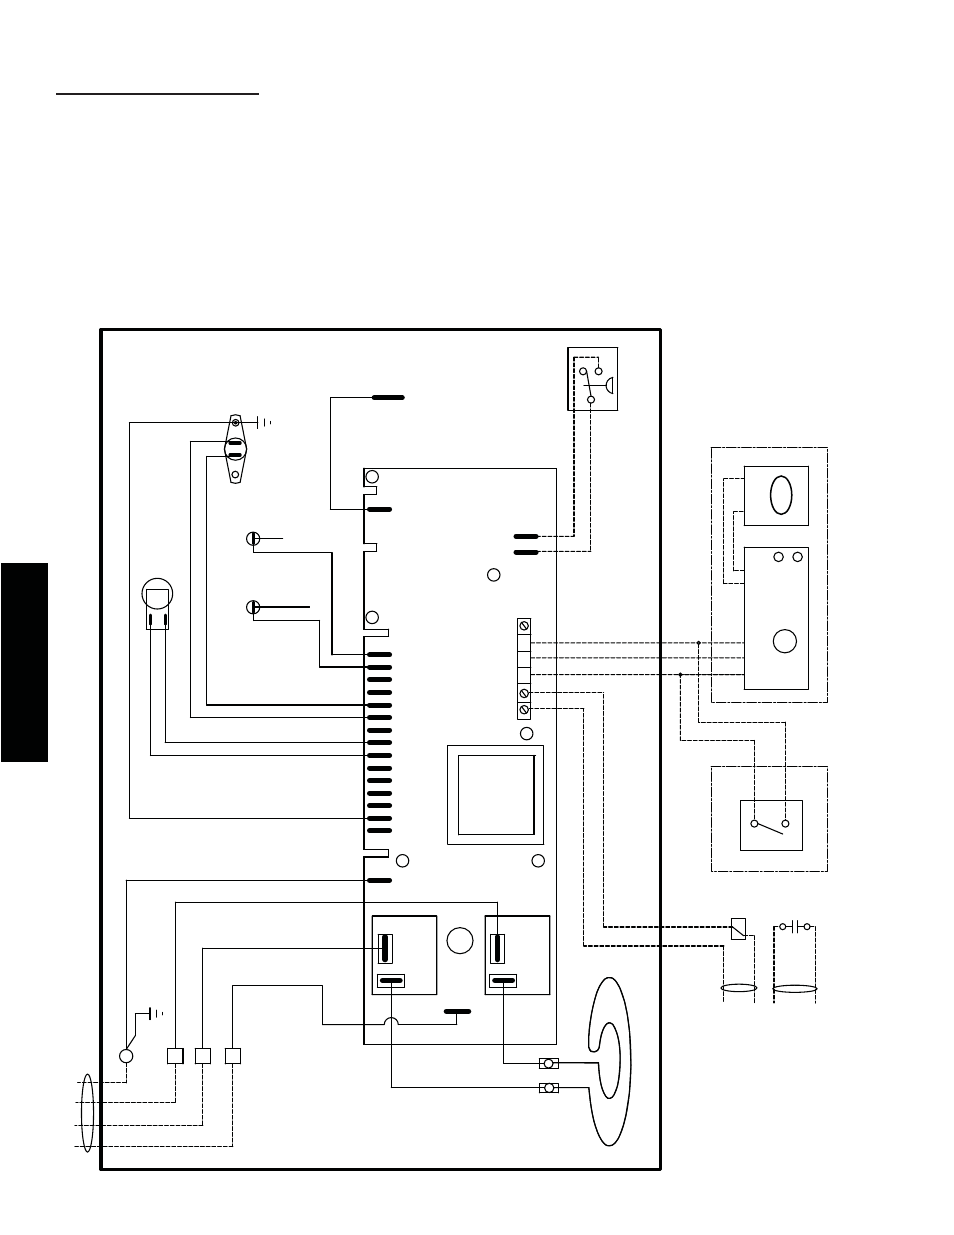 Contract Or  240v Models  Wiring Diagrams